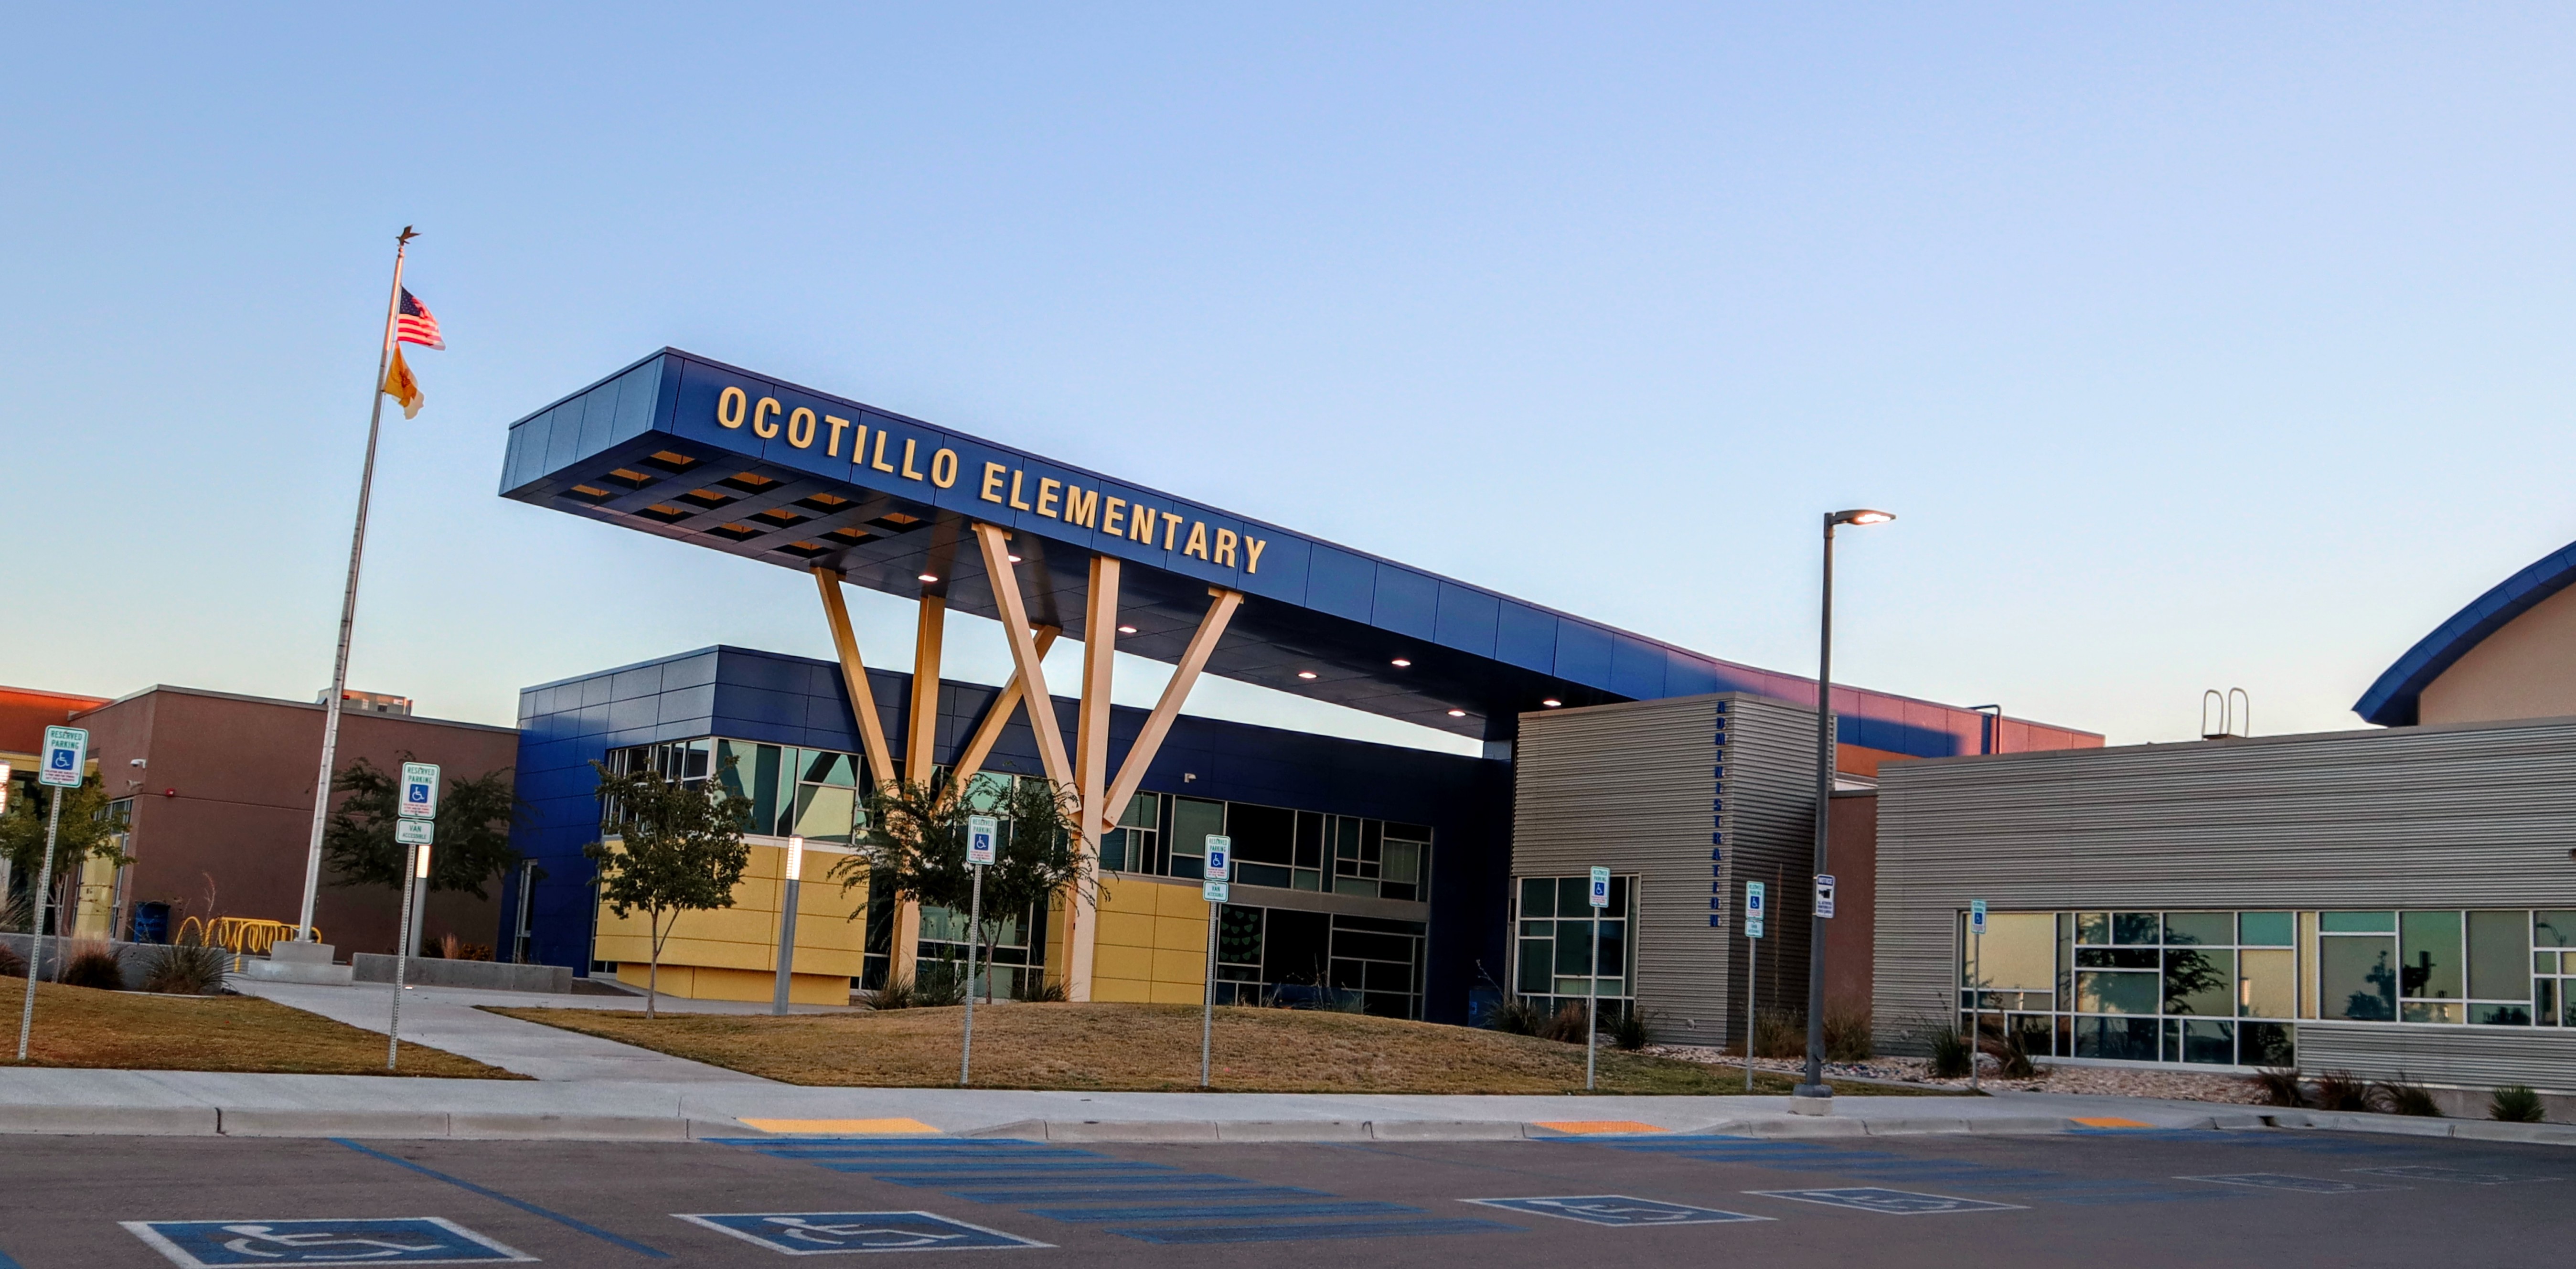 Entrace to Ocotillo Elementary